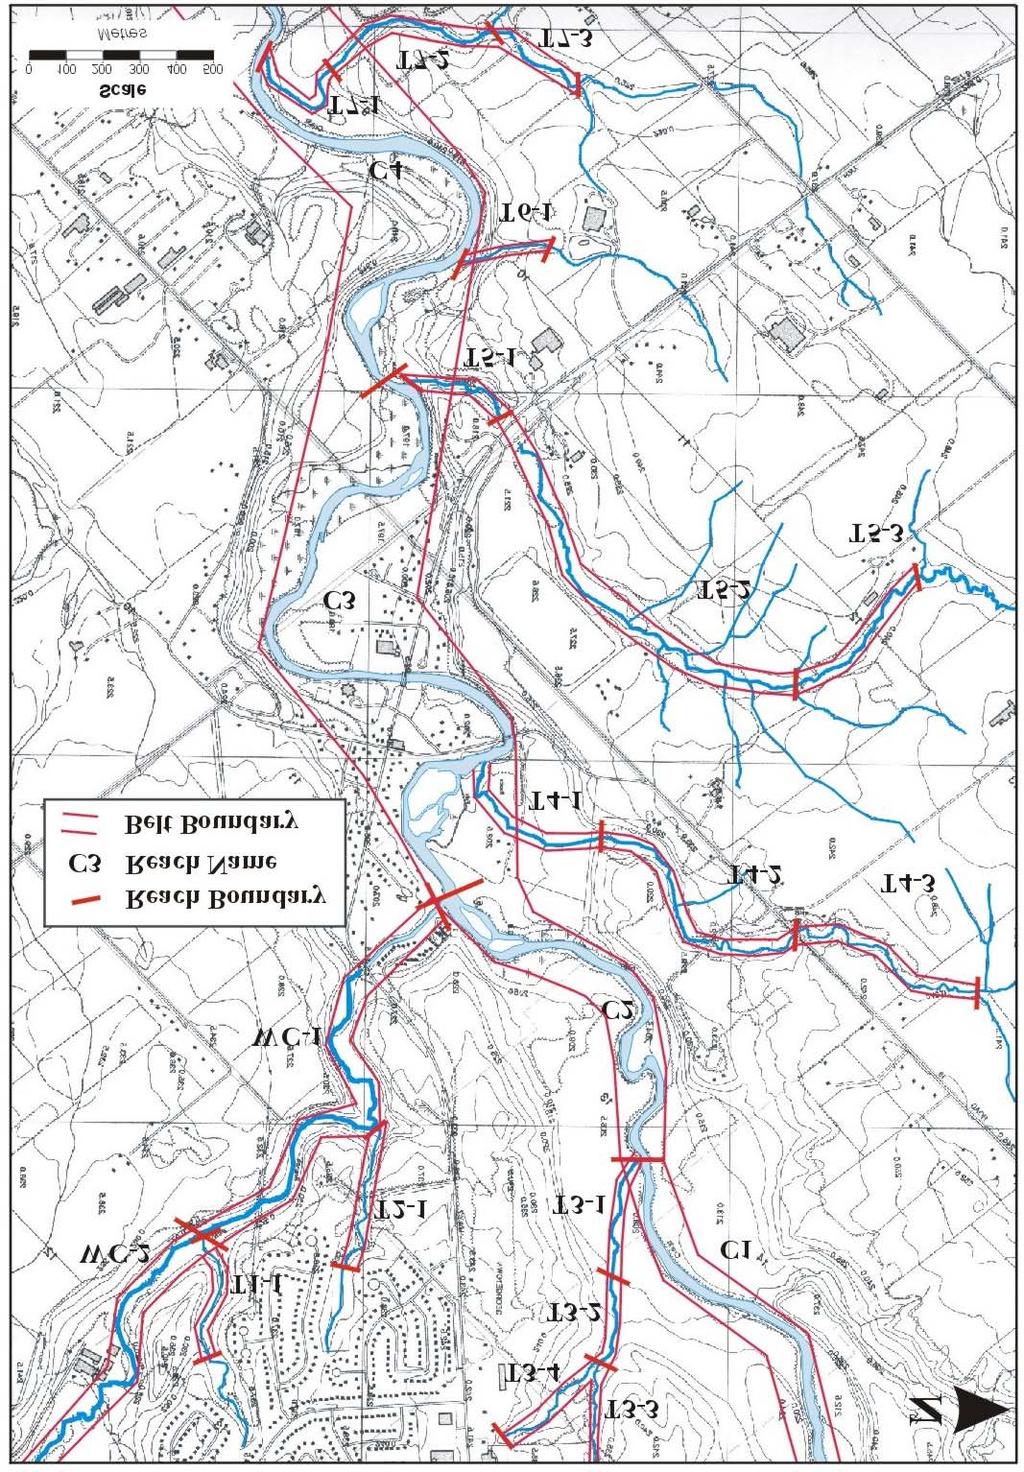 Figure 4.1: This figure illustrates the general application of belt width delineation Procedure 1 for watercourses located in Georgetown, Ontario.